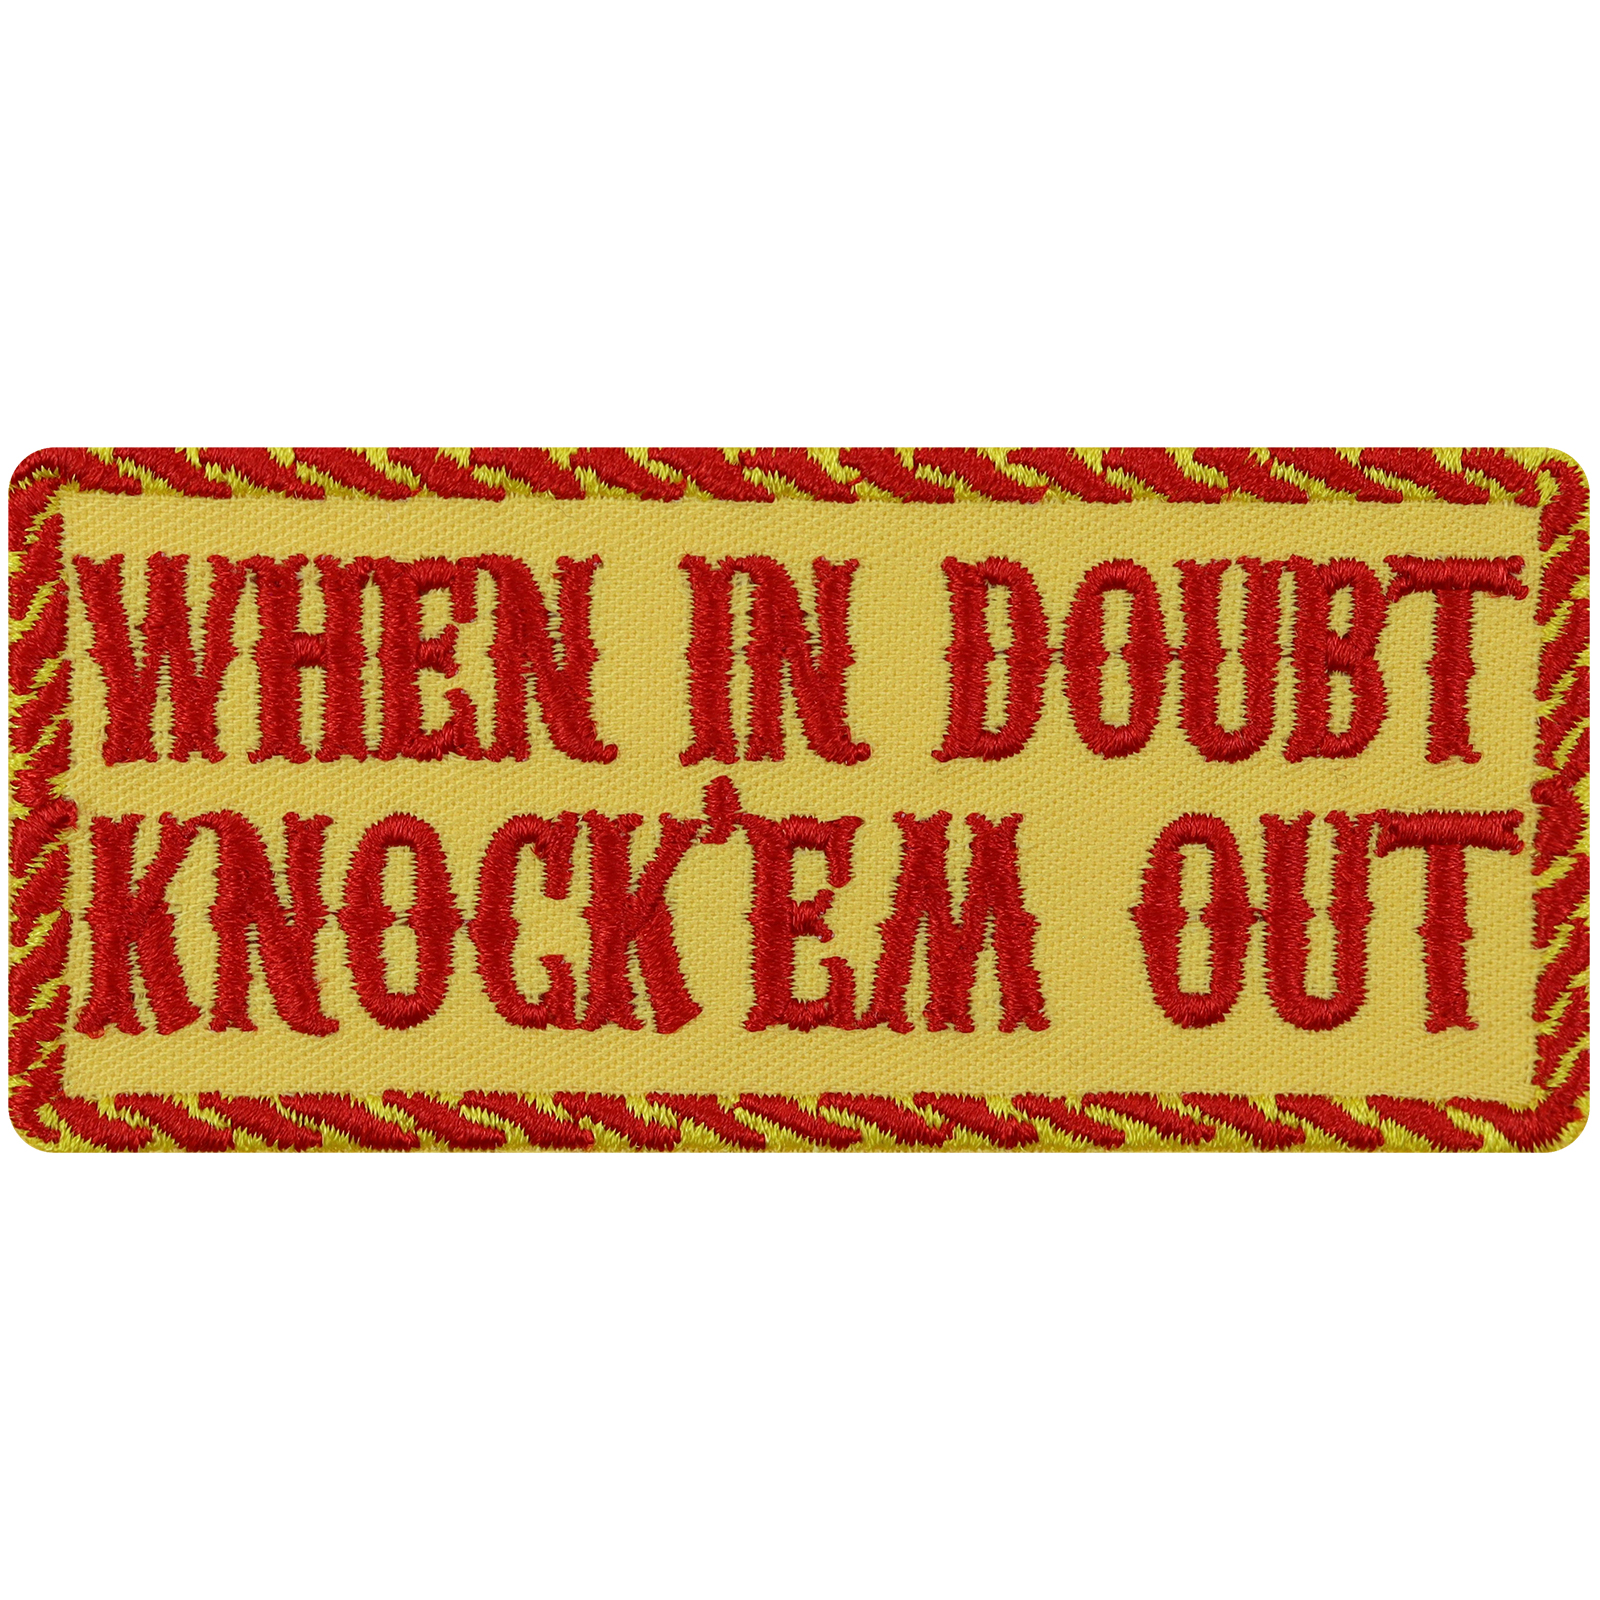 When in doubt knock'em out - Patch